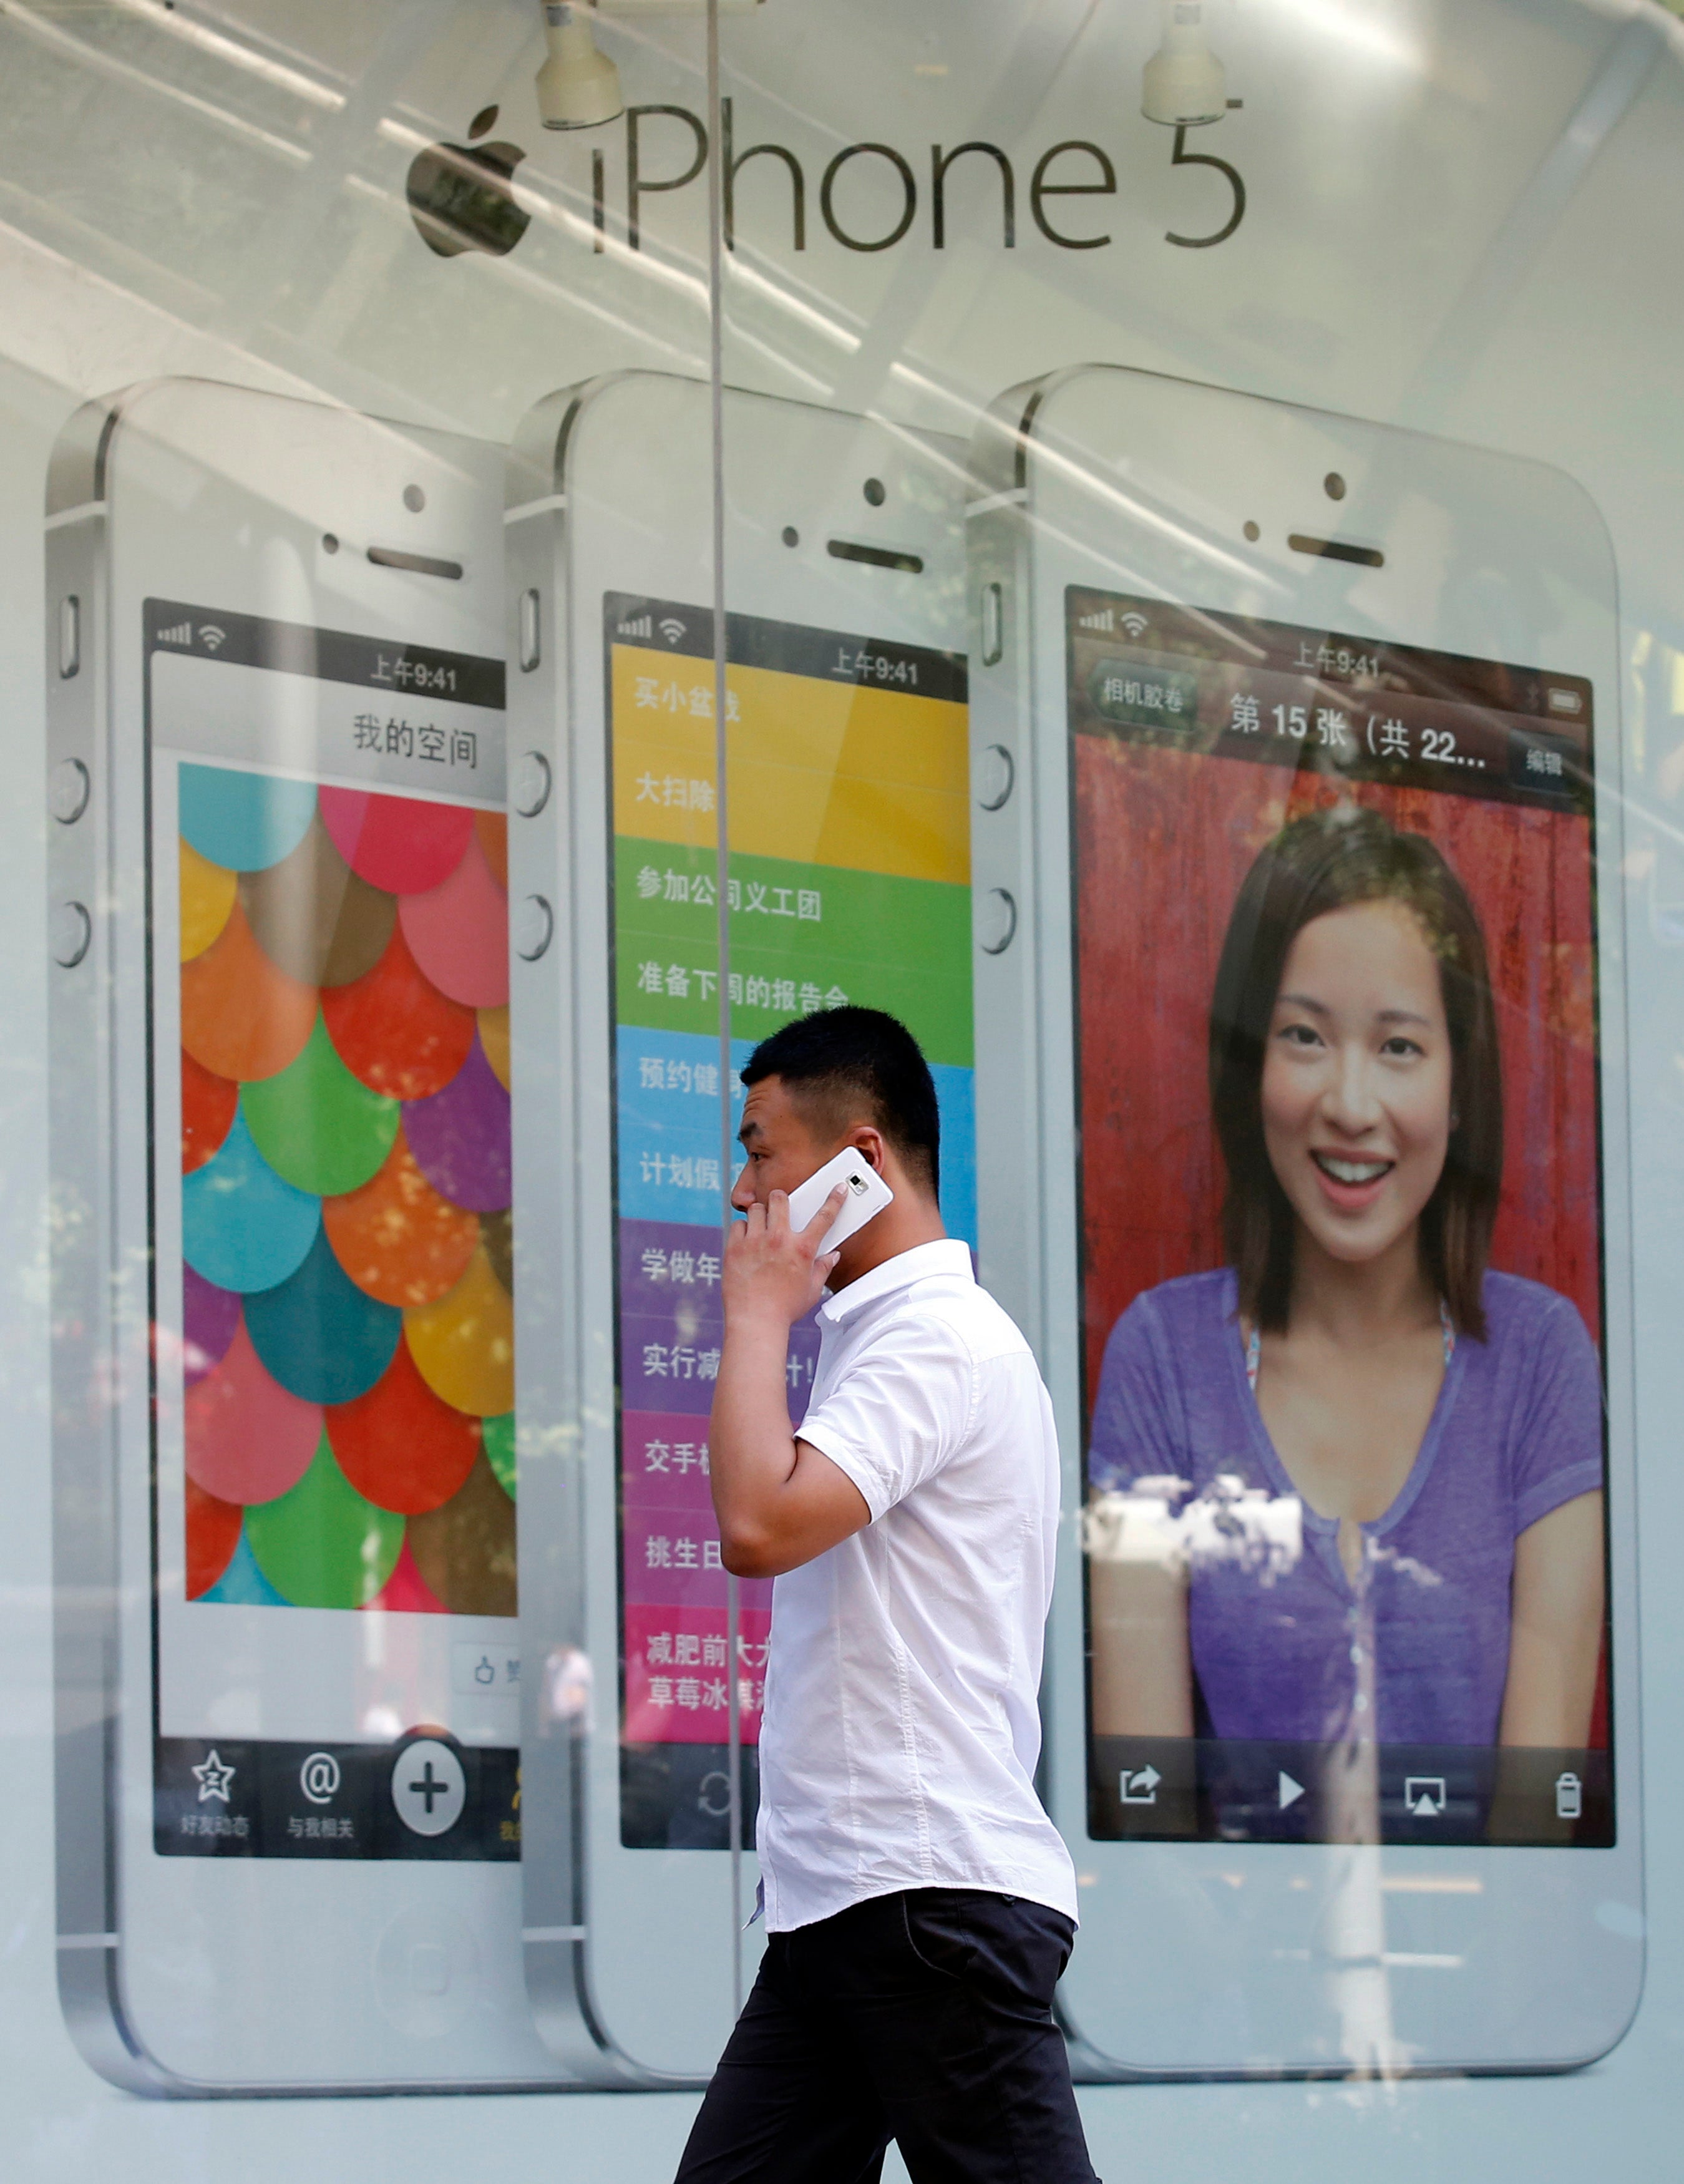 A man talks on a mobile phone as he walks past an iPhone advertising board in Beijing July 24, 2013. REUTERS/Kim Kyung-Hoon